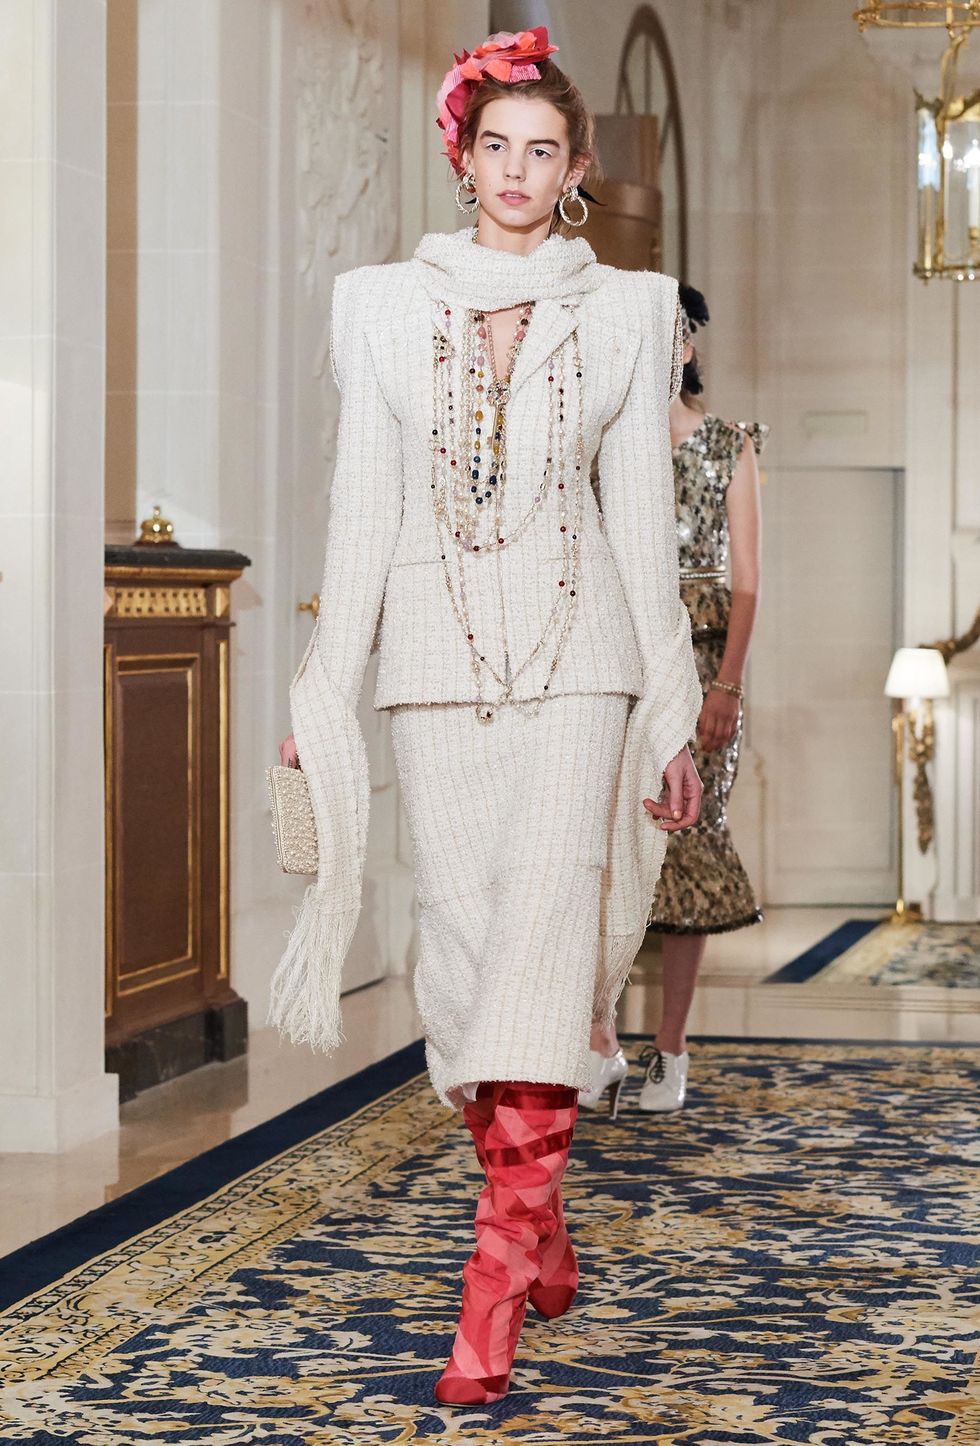 All the Looks From the Chanel Pre-Fall 2017 Collection